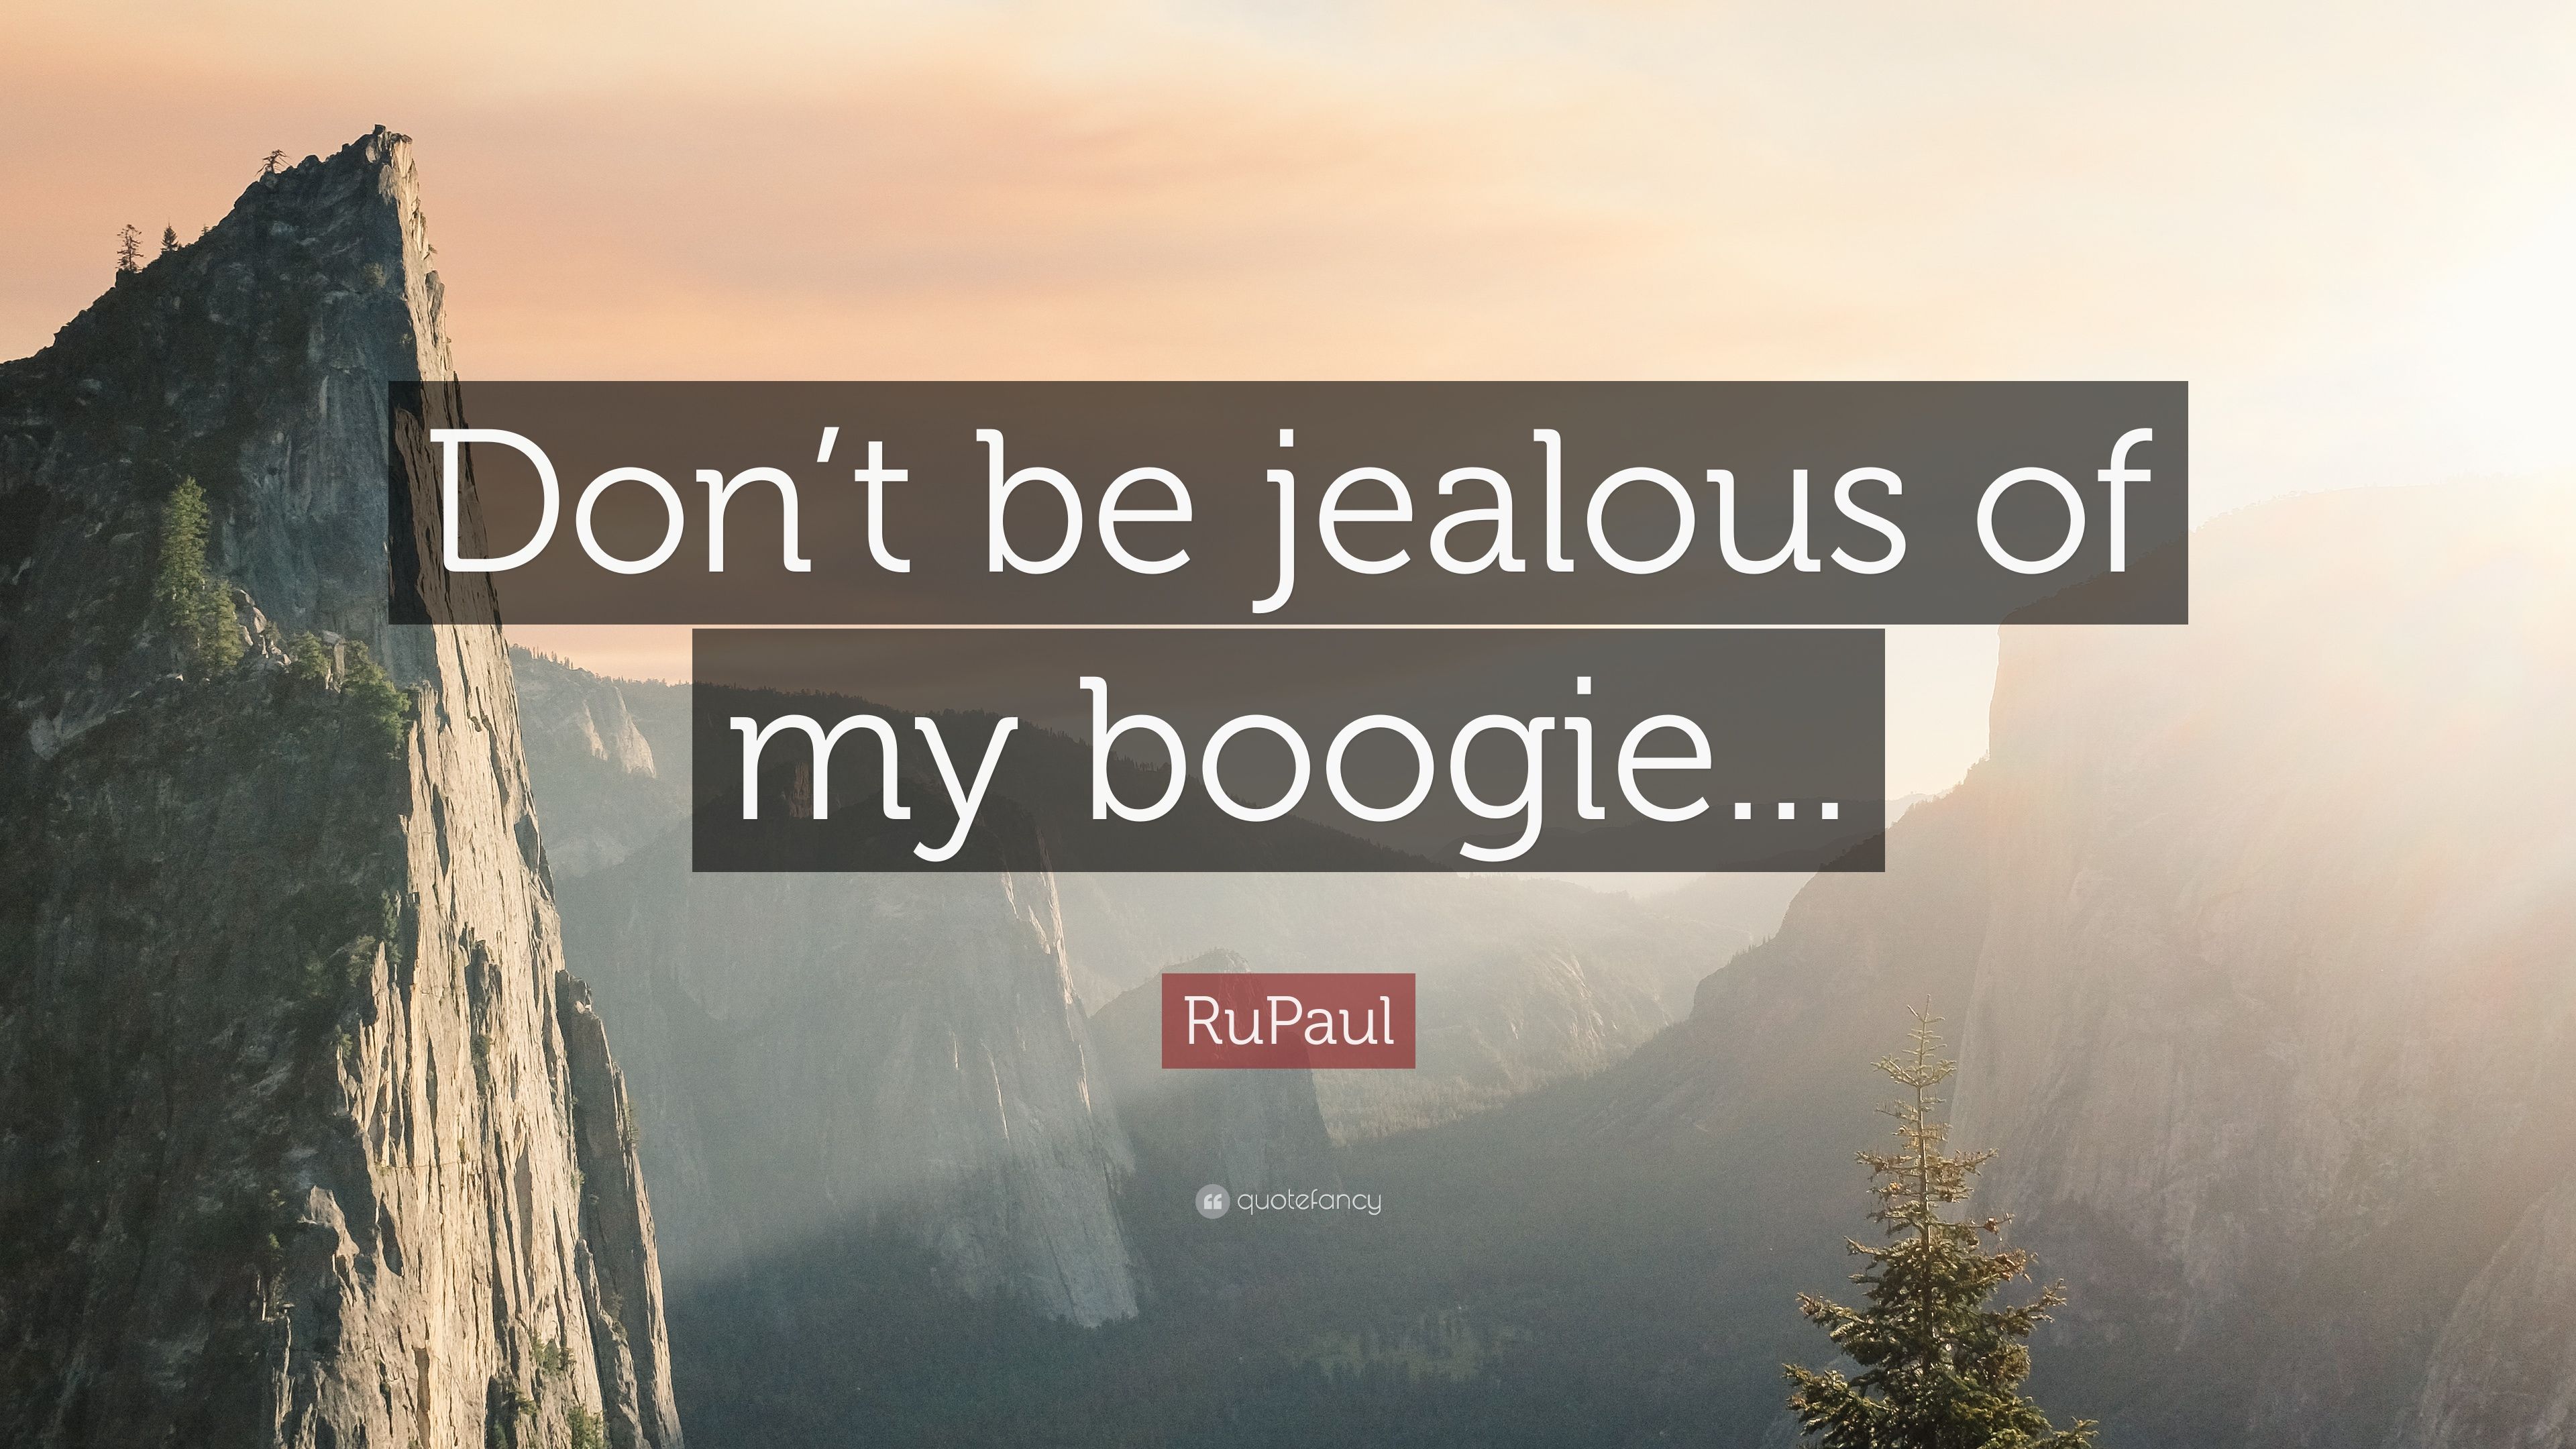 RuPaul Quote: “Don't be jealous of my boogie.” 12 wallpaper